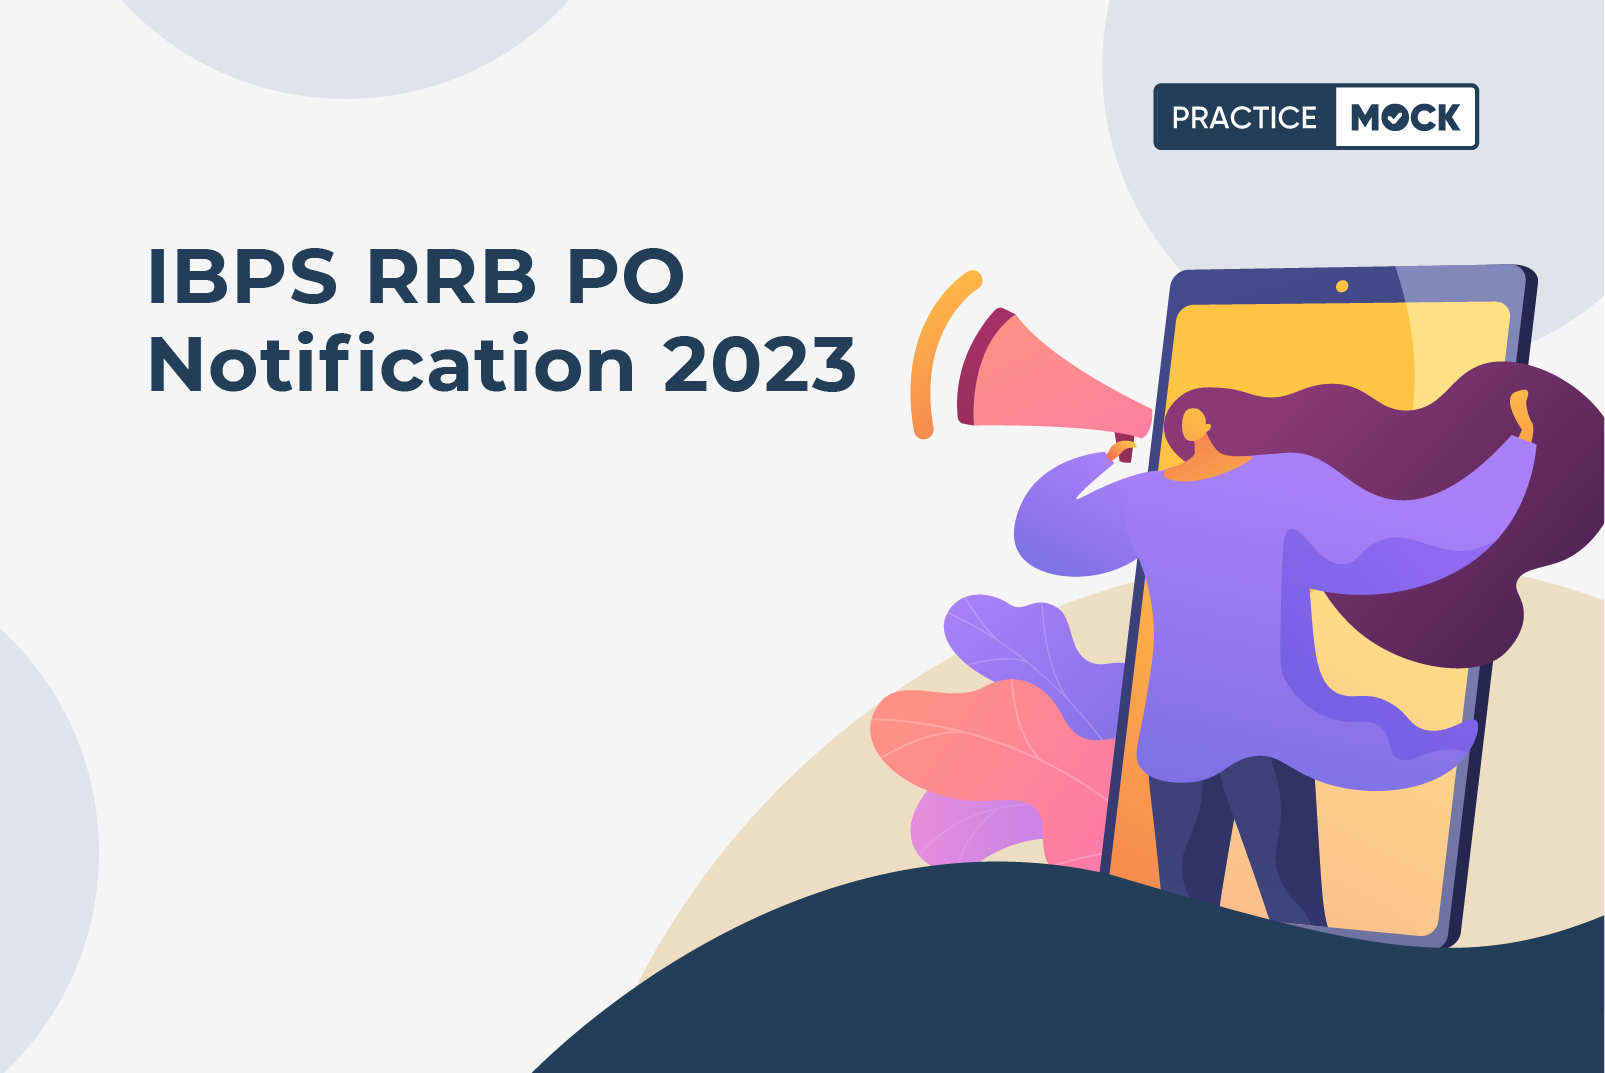 IBPS RRB PO Notification 2023